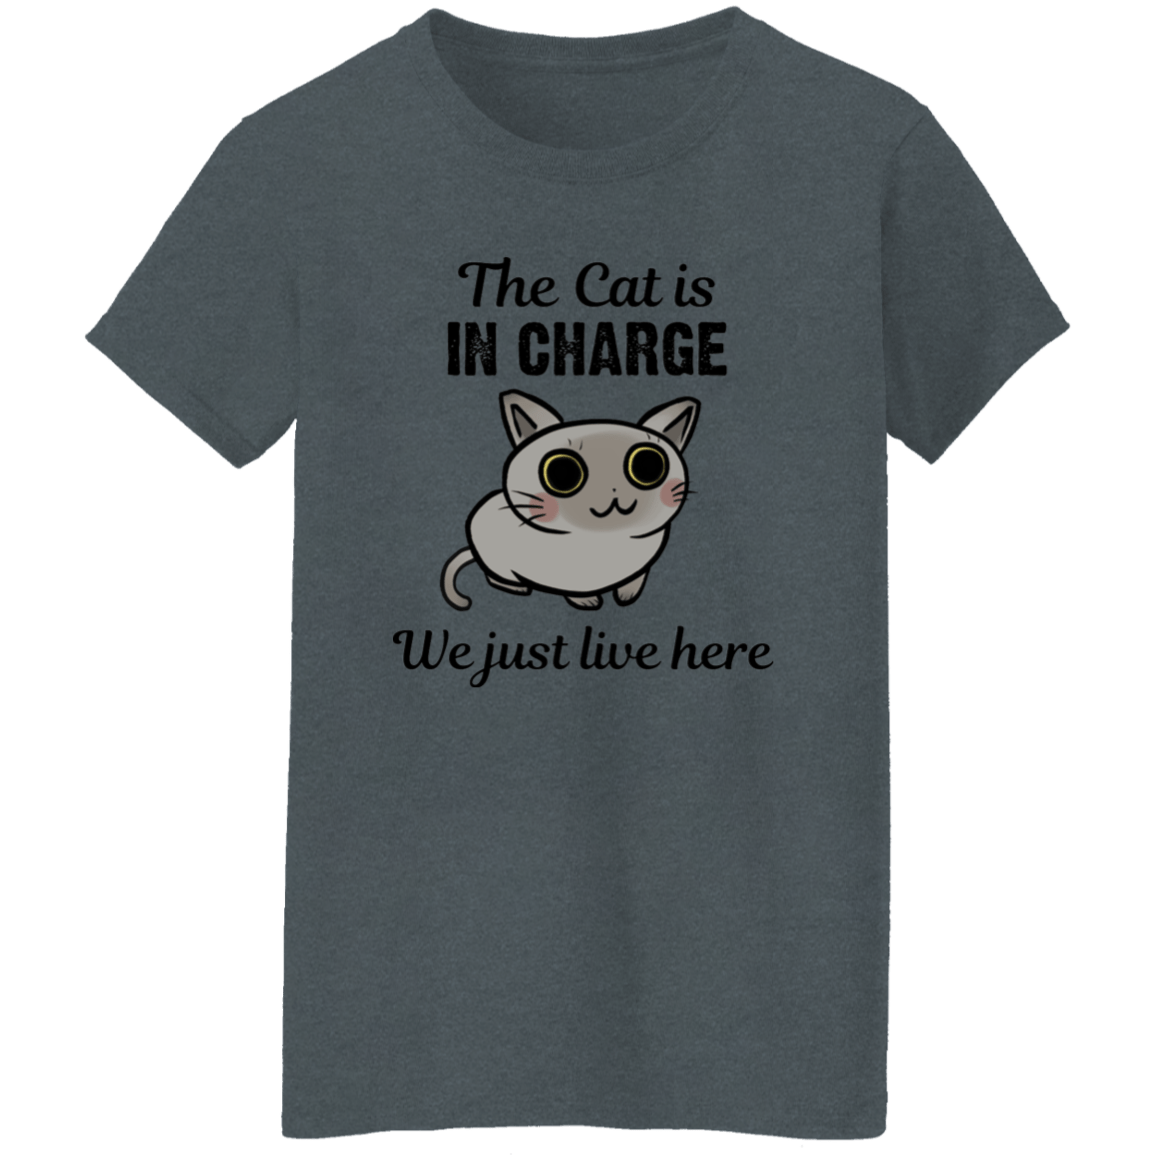 The Cat is in Charge - Ladies T-Shirt.